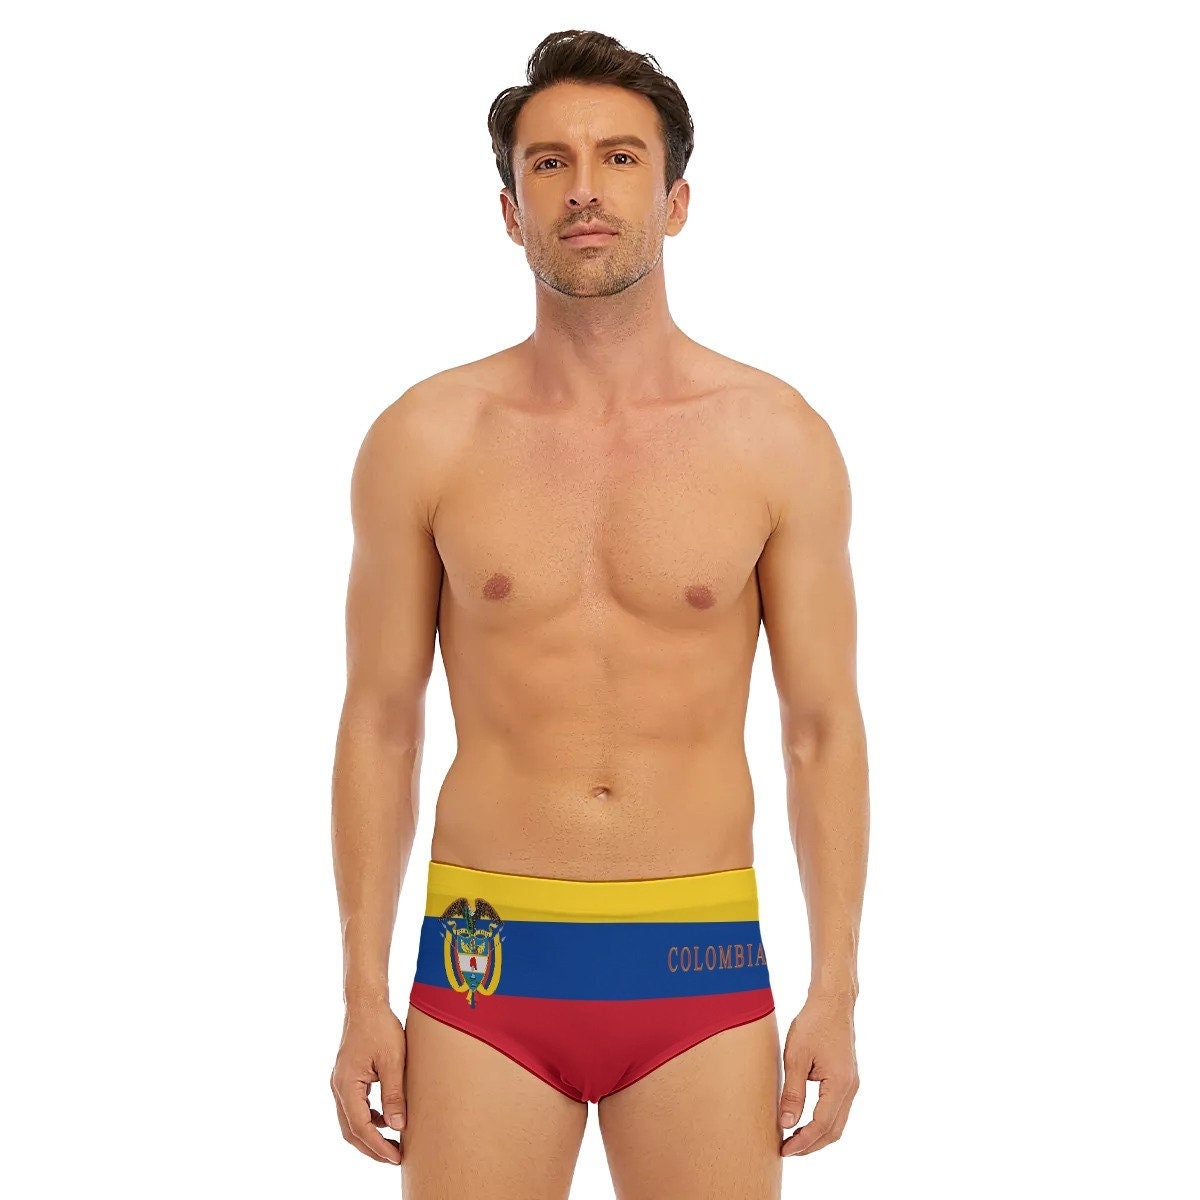 Colombian Men's Swim Trunks, Colombia Flag, Bogotá, Design, Colombian, Men,  Latino, Football, Soccer, Gifts, Teens, Adults, Outfit. -  Canada